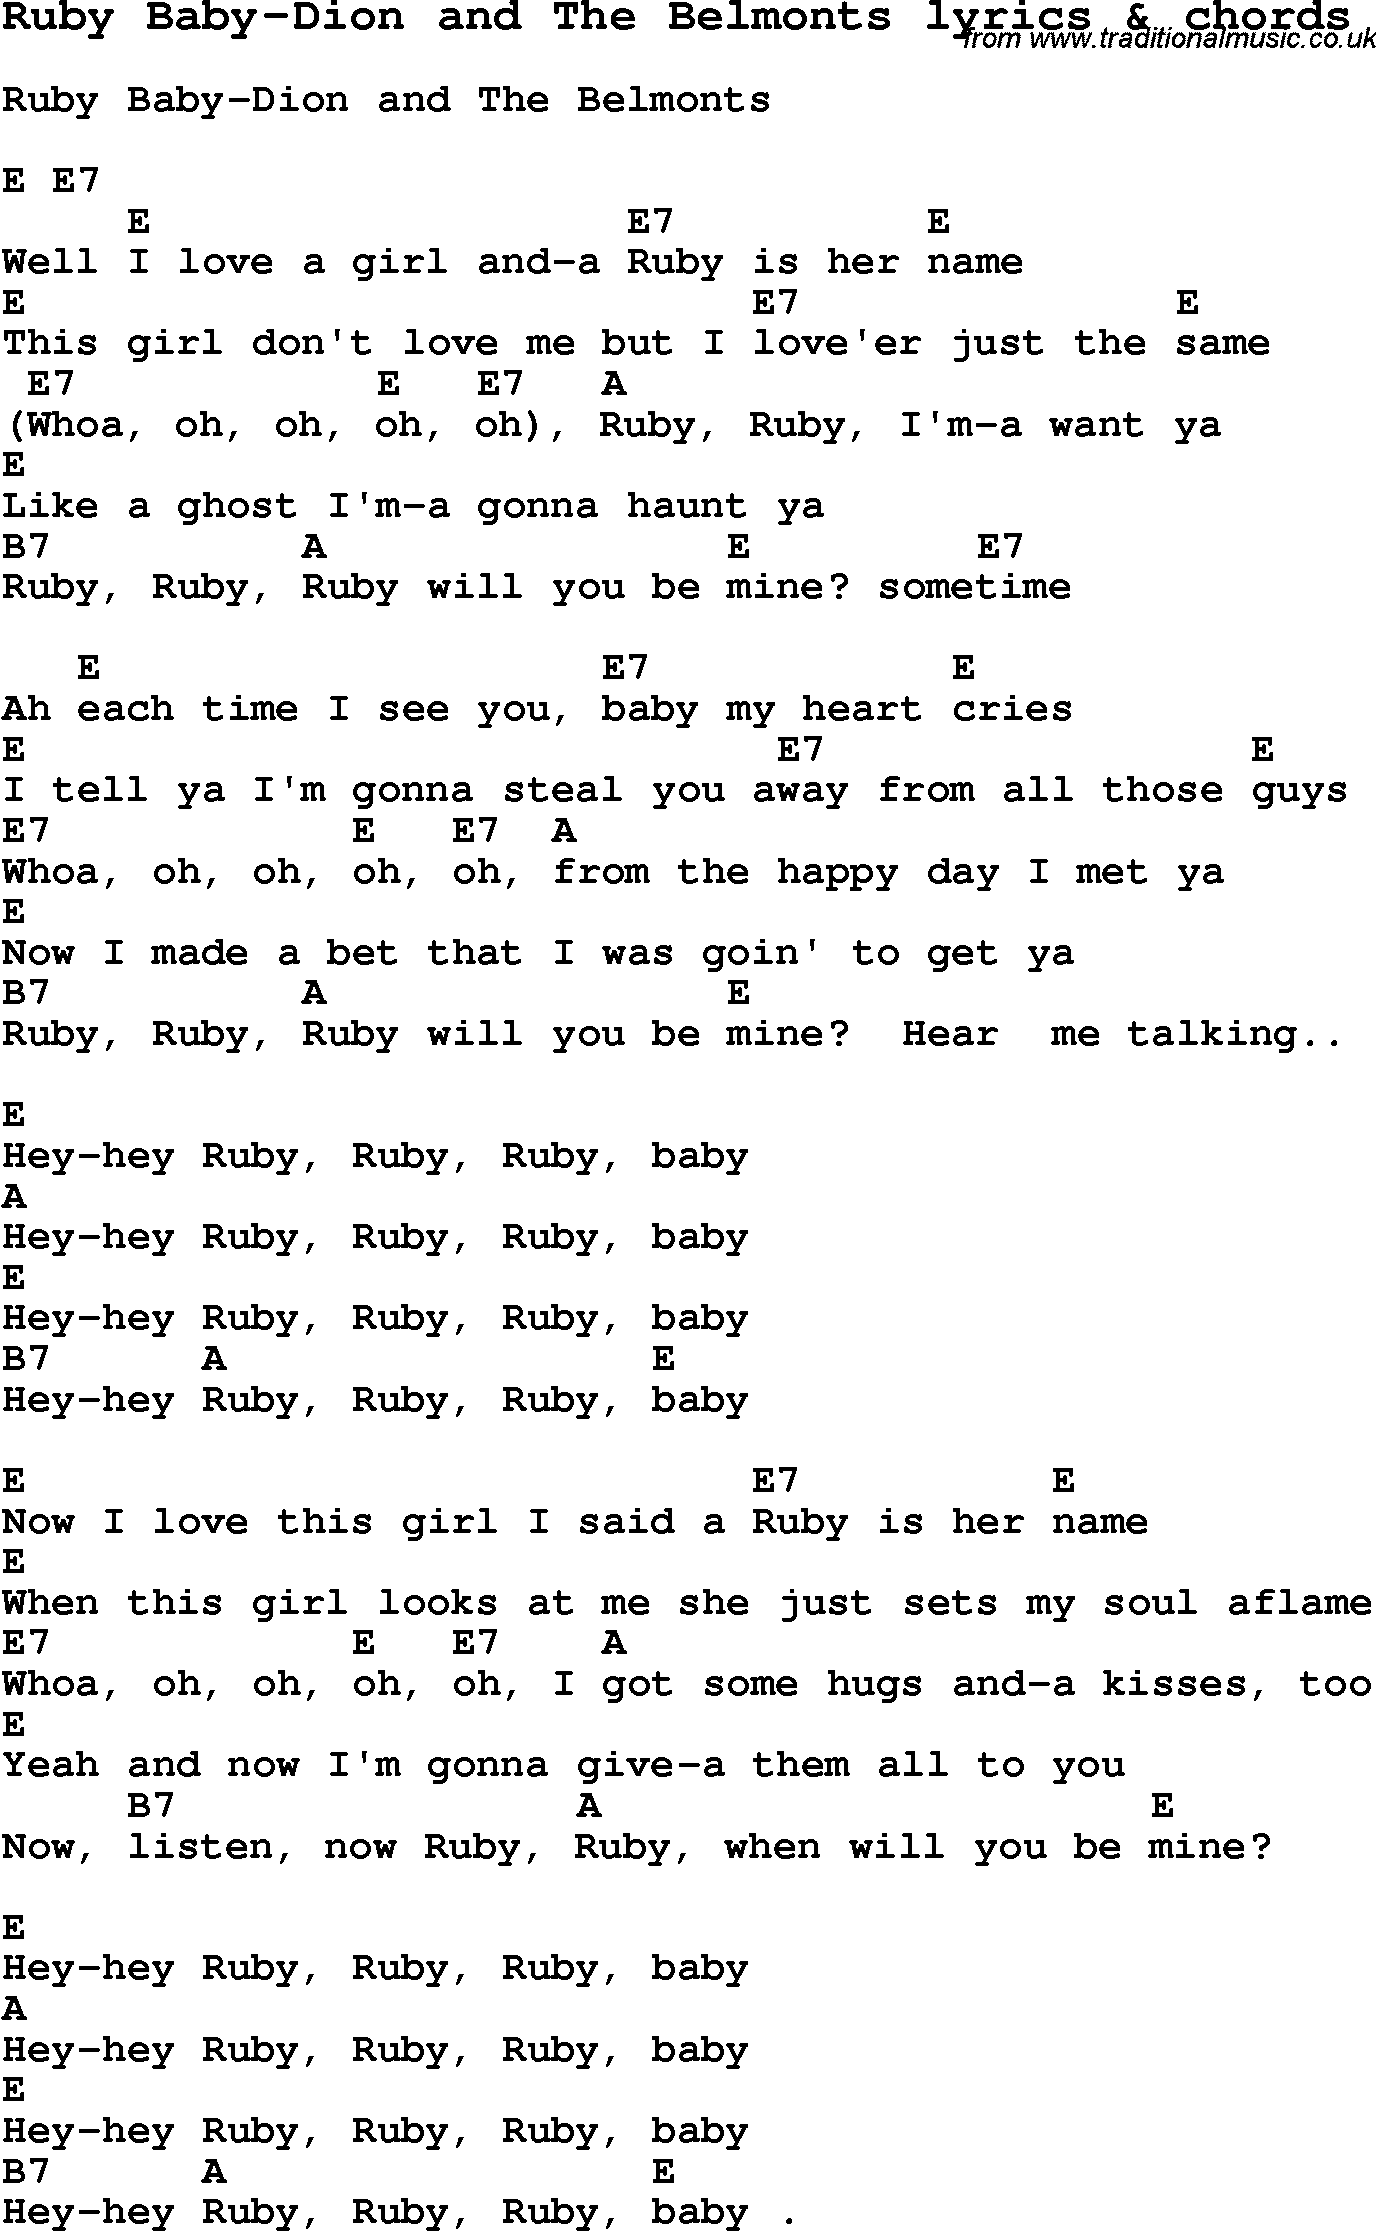 Love Song Lyrics for: Ruby Baby-Dion and The Belmonts with chords for Ukulele, Guitar Banjo etc.